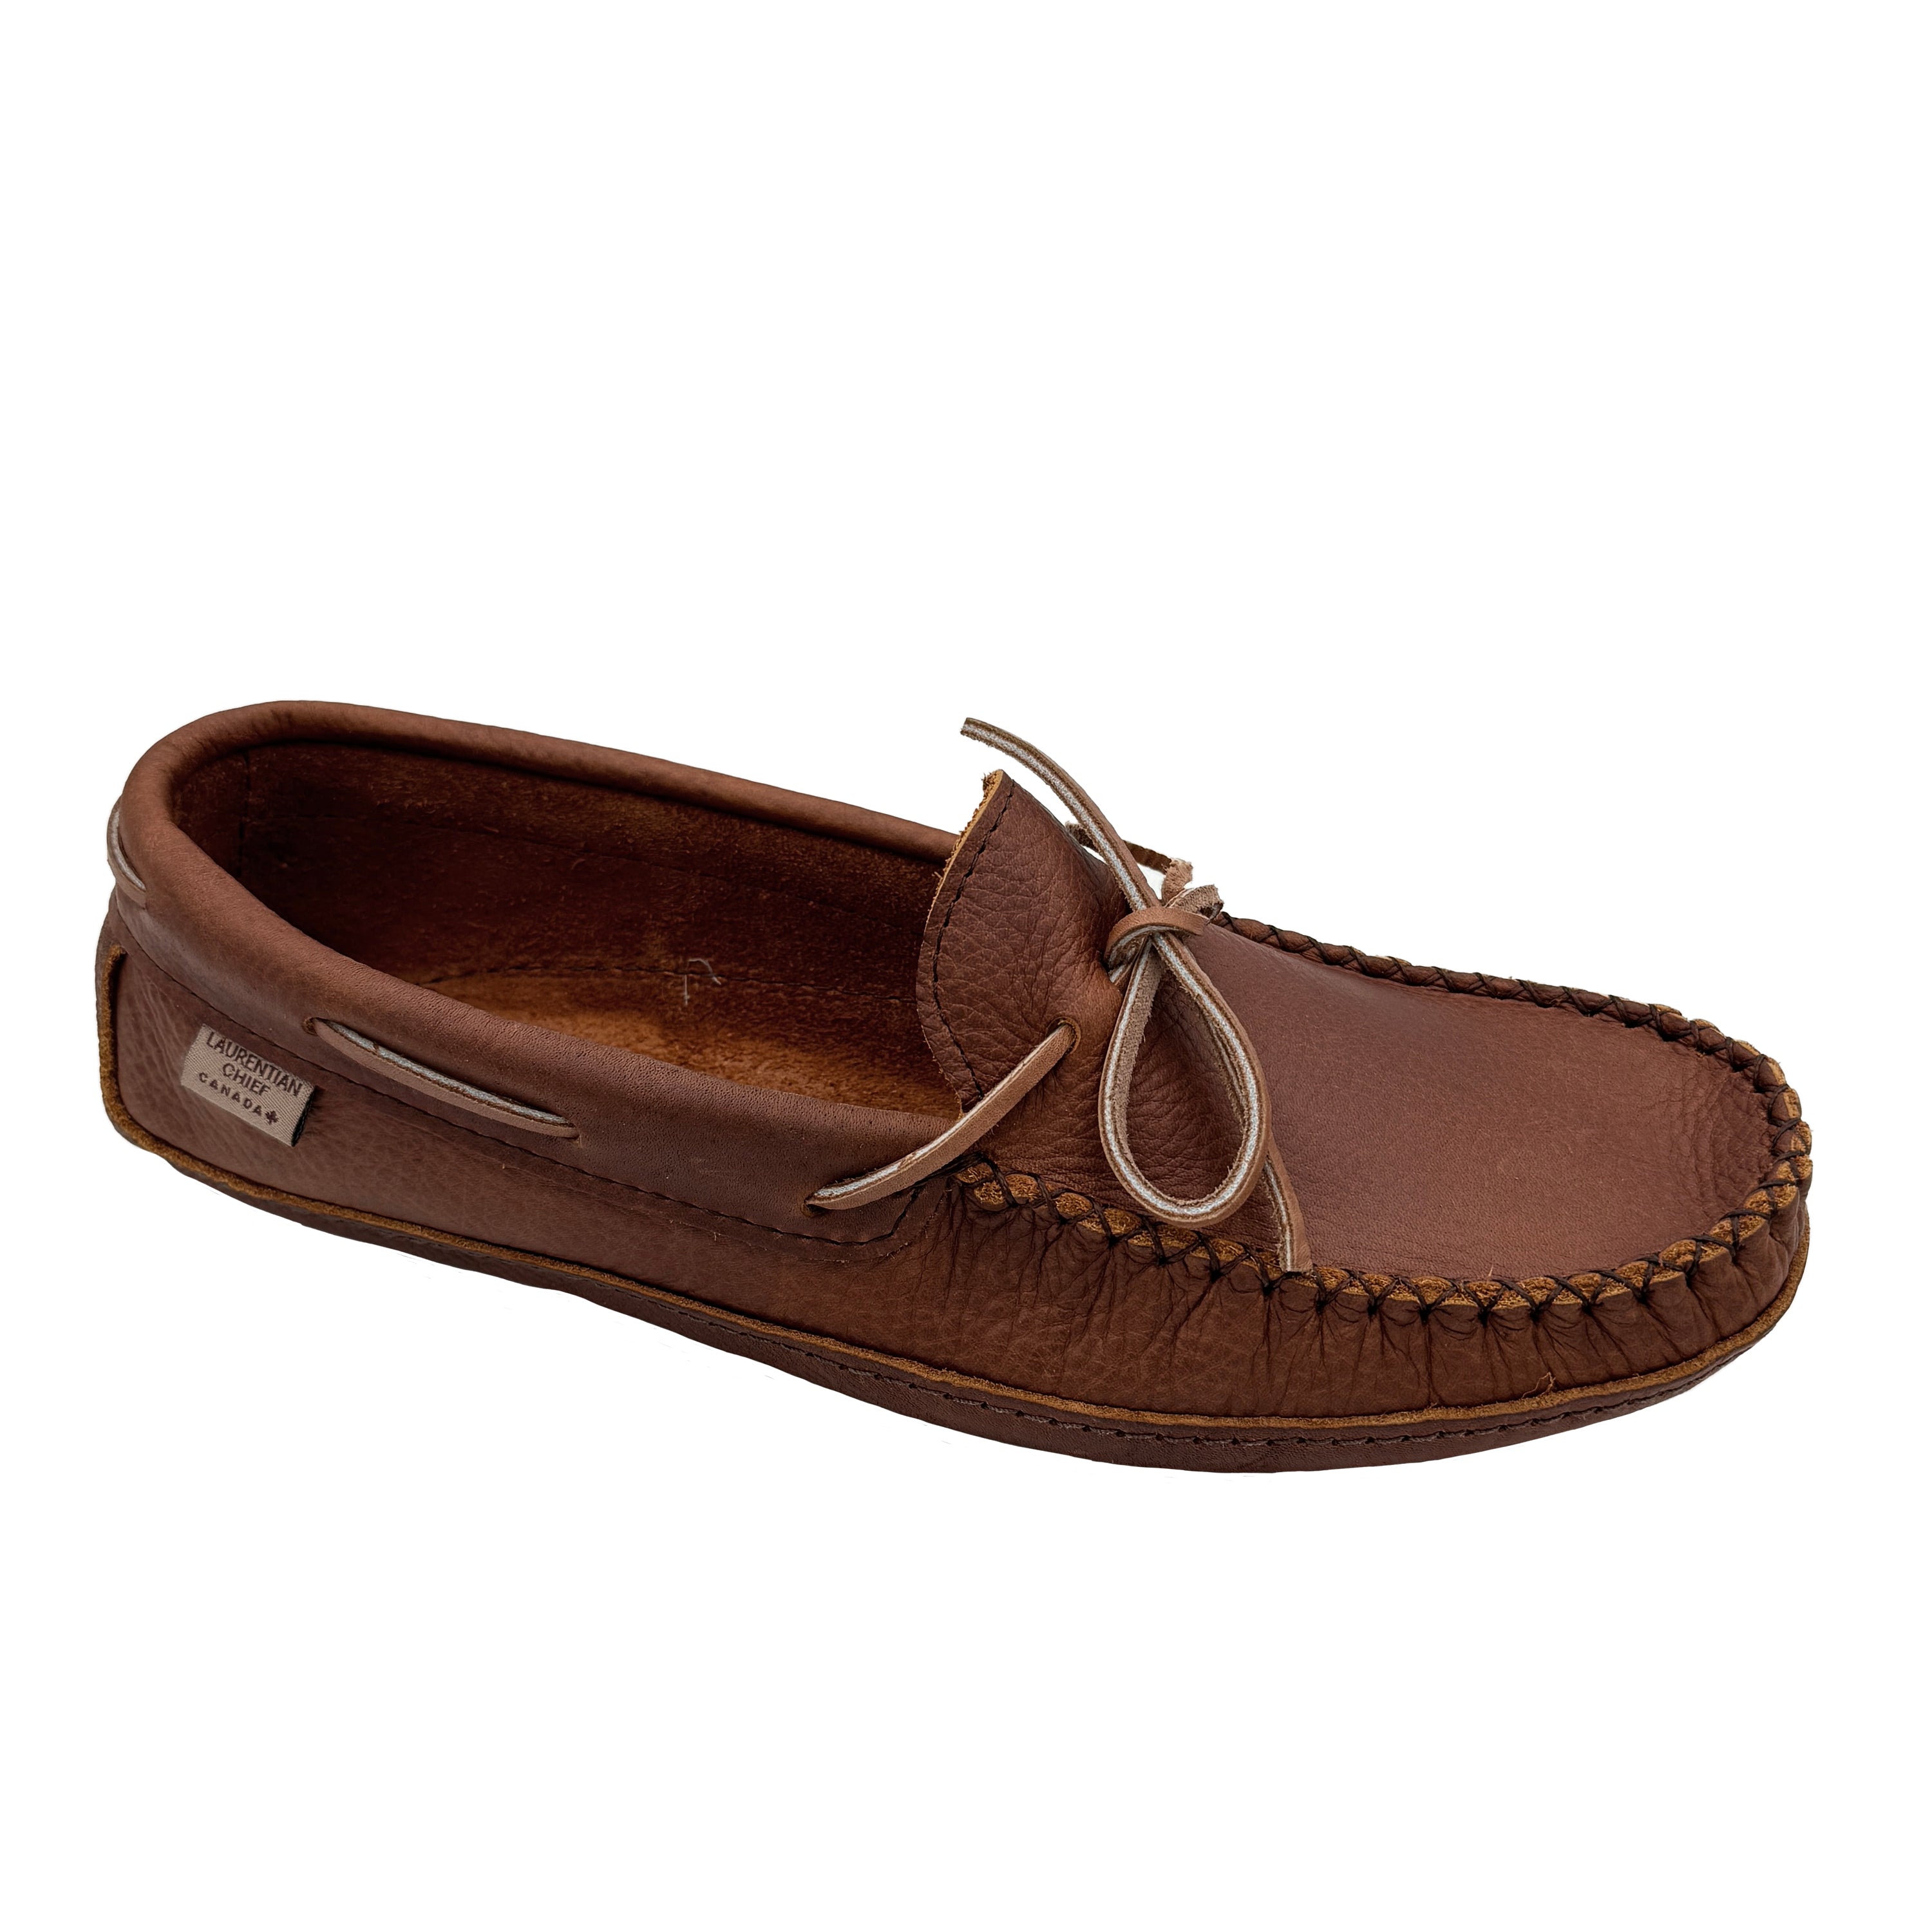 Men's Earthing Moccasins for Wide Feet